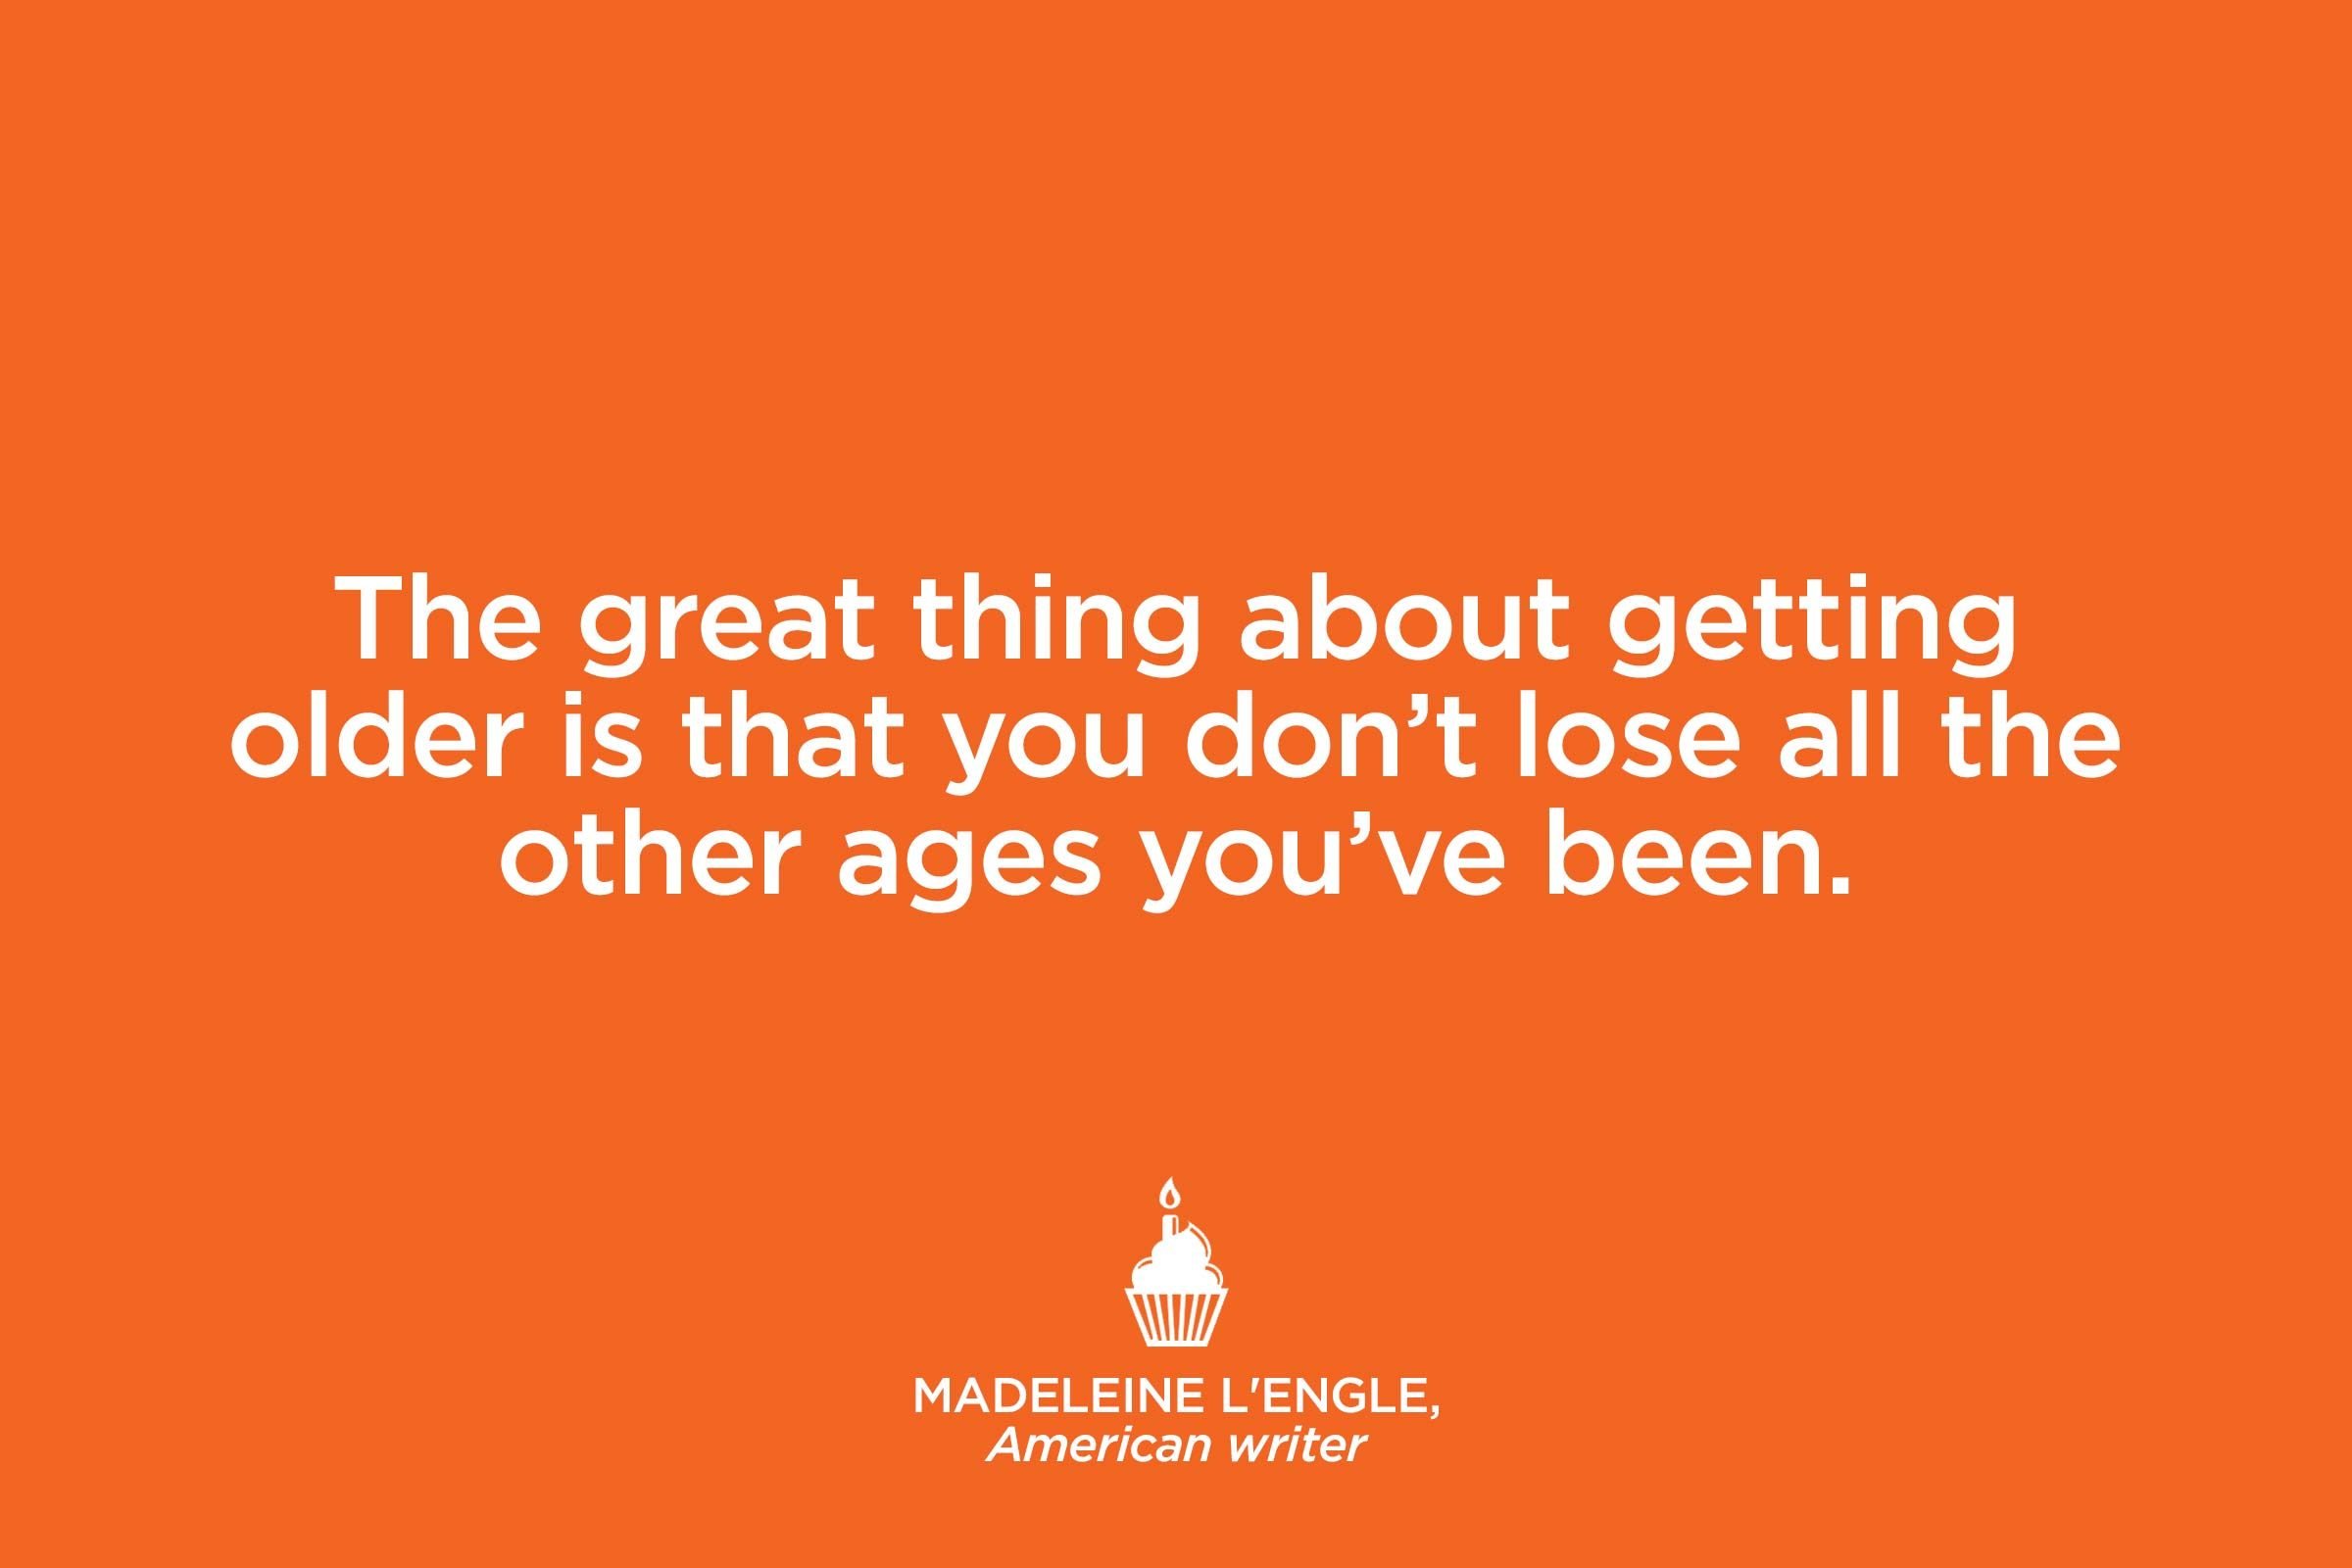 Quotes That Make You Feel Better About Getting Older The Healthy 9819